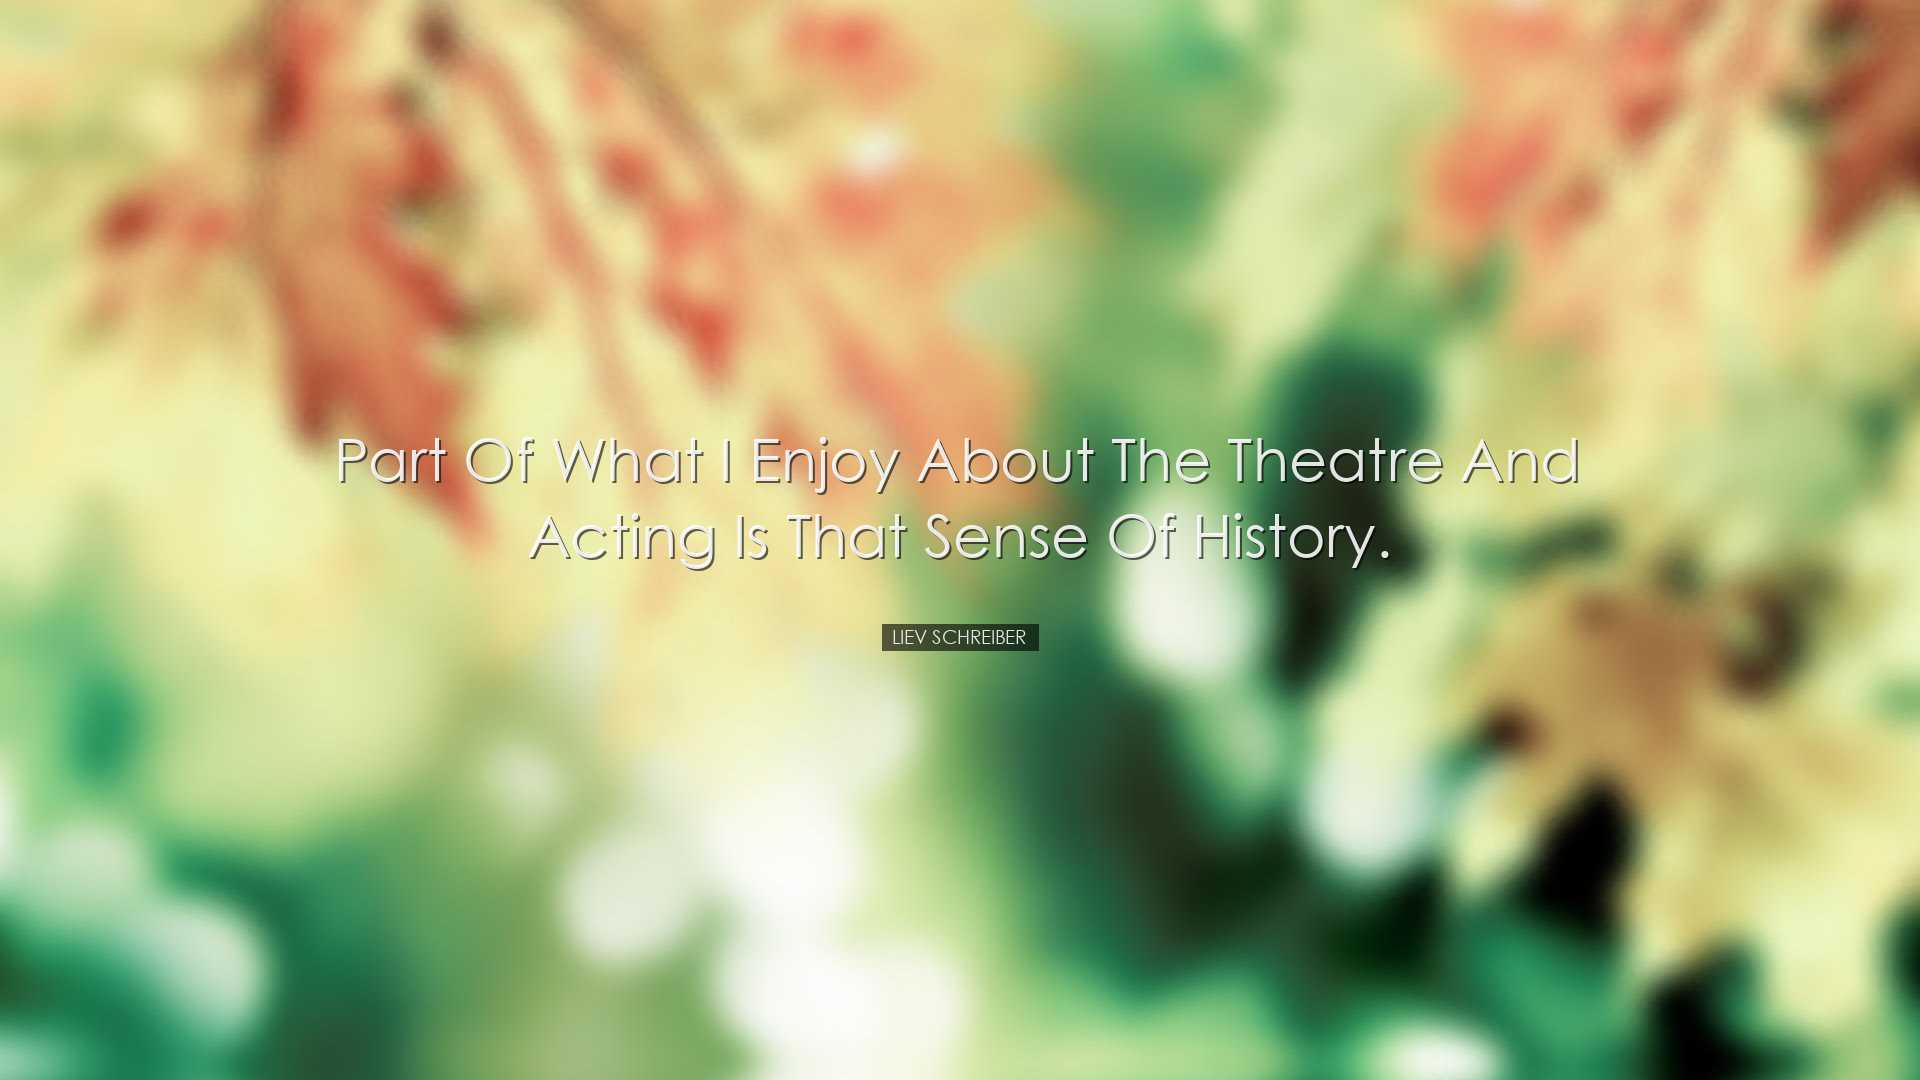 Part of what I enjoy about the theatre and acting is that sense of